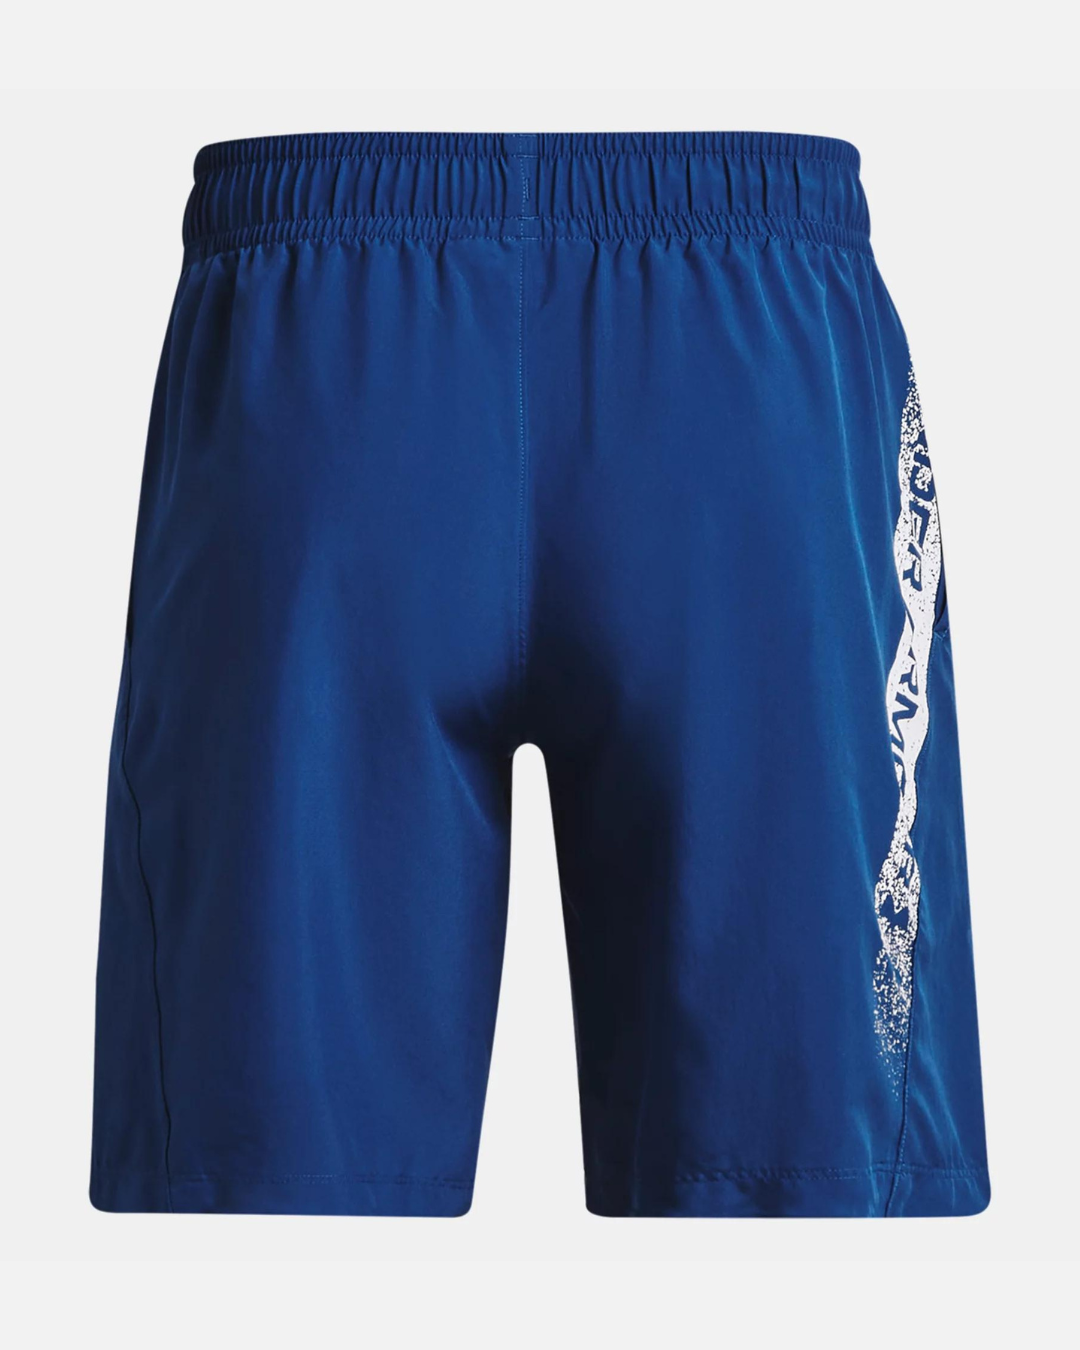 Under Armor Woven Graphic Shorts - Blue/White